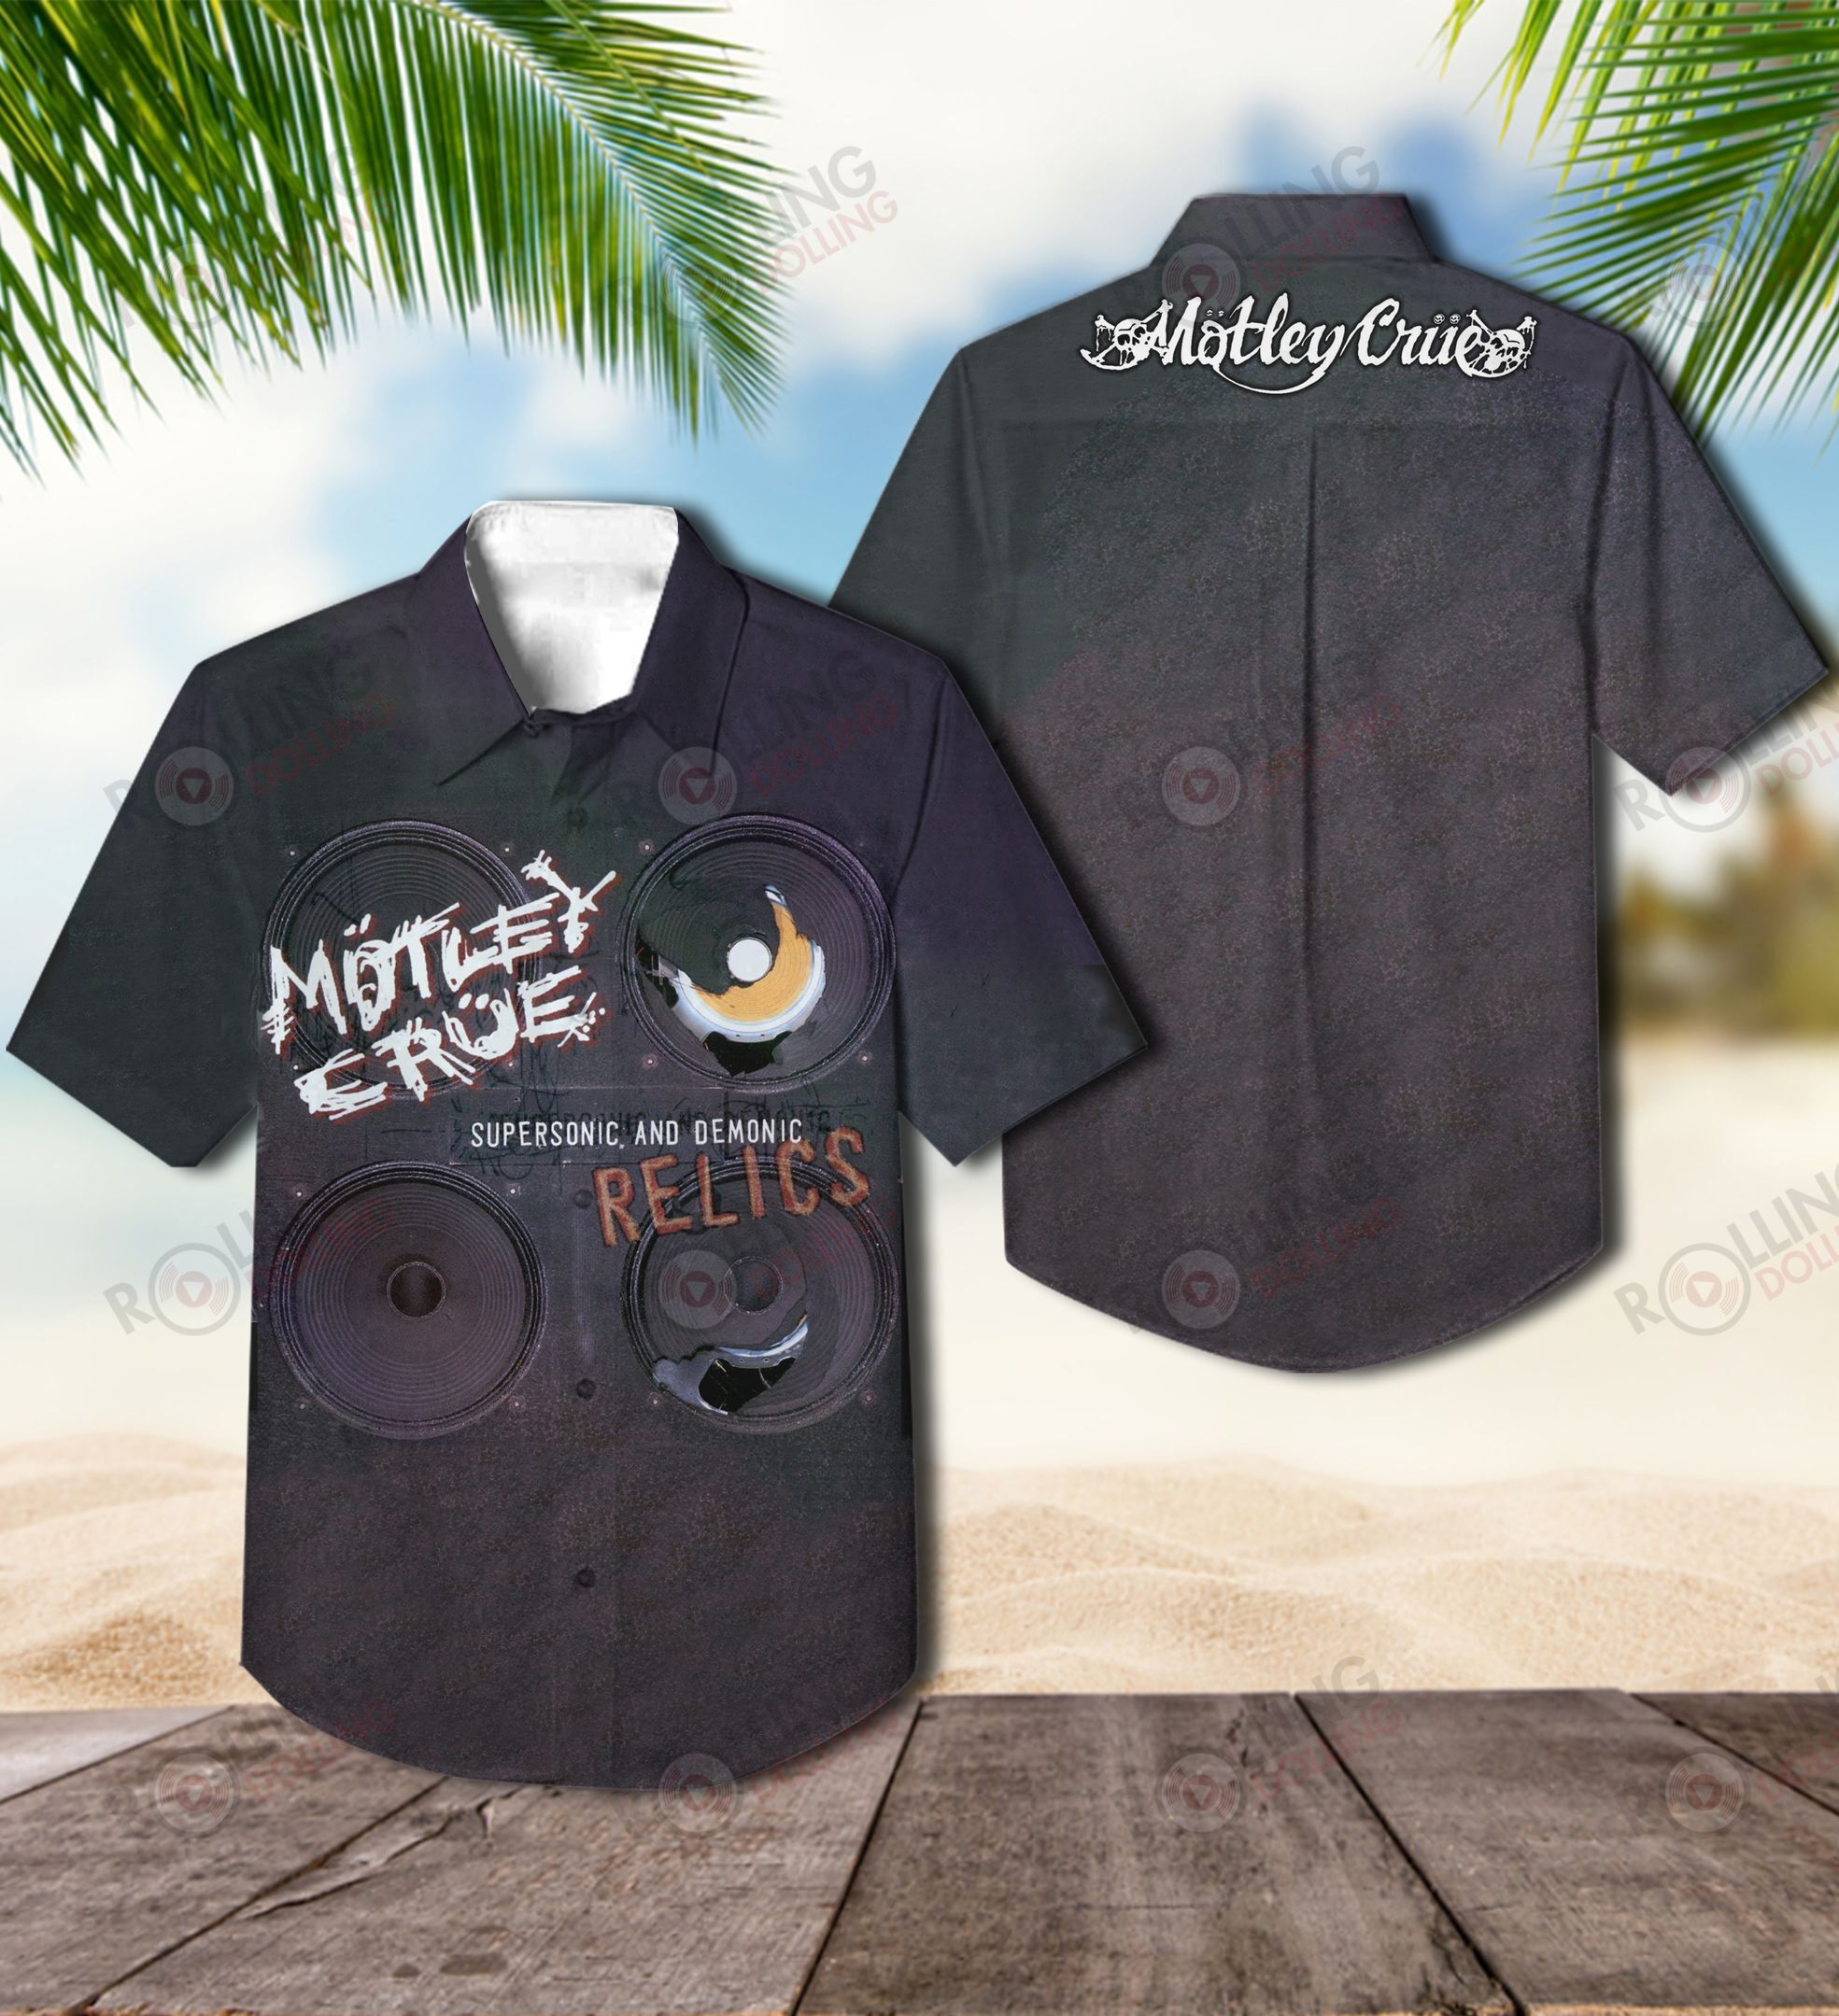 This would make a great gift for any fan who loves Hawaiian Shirt as well as Rock band 84